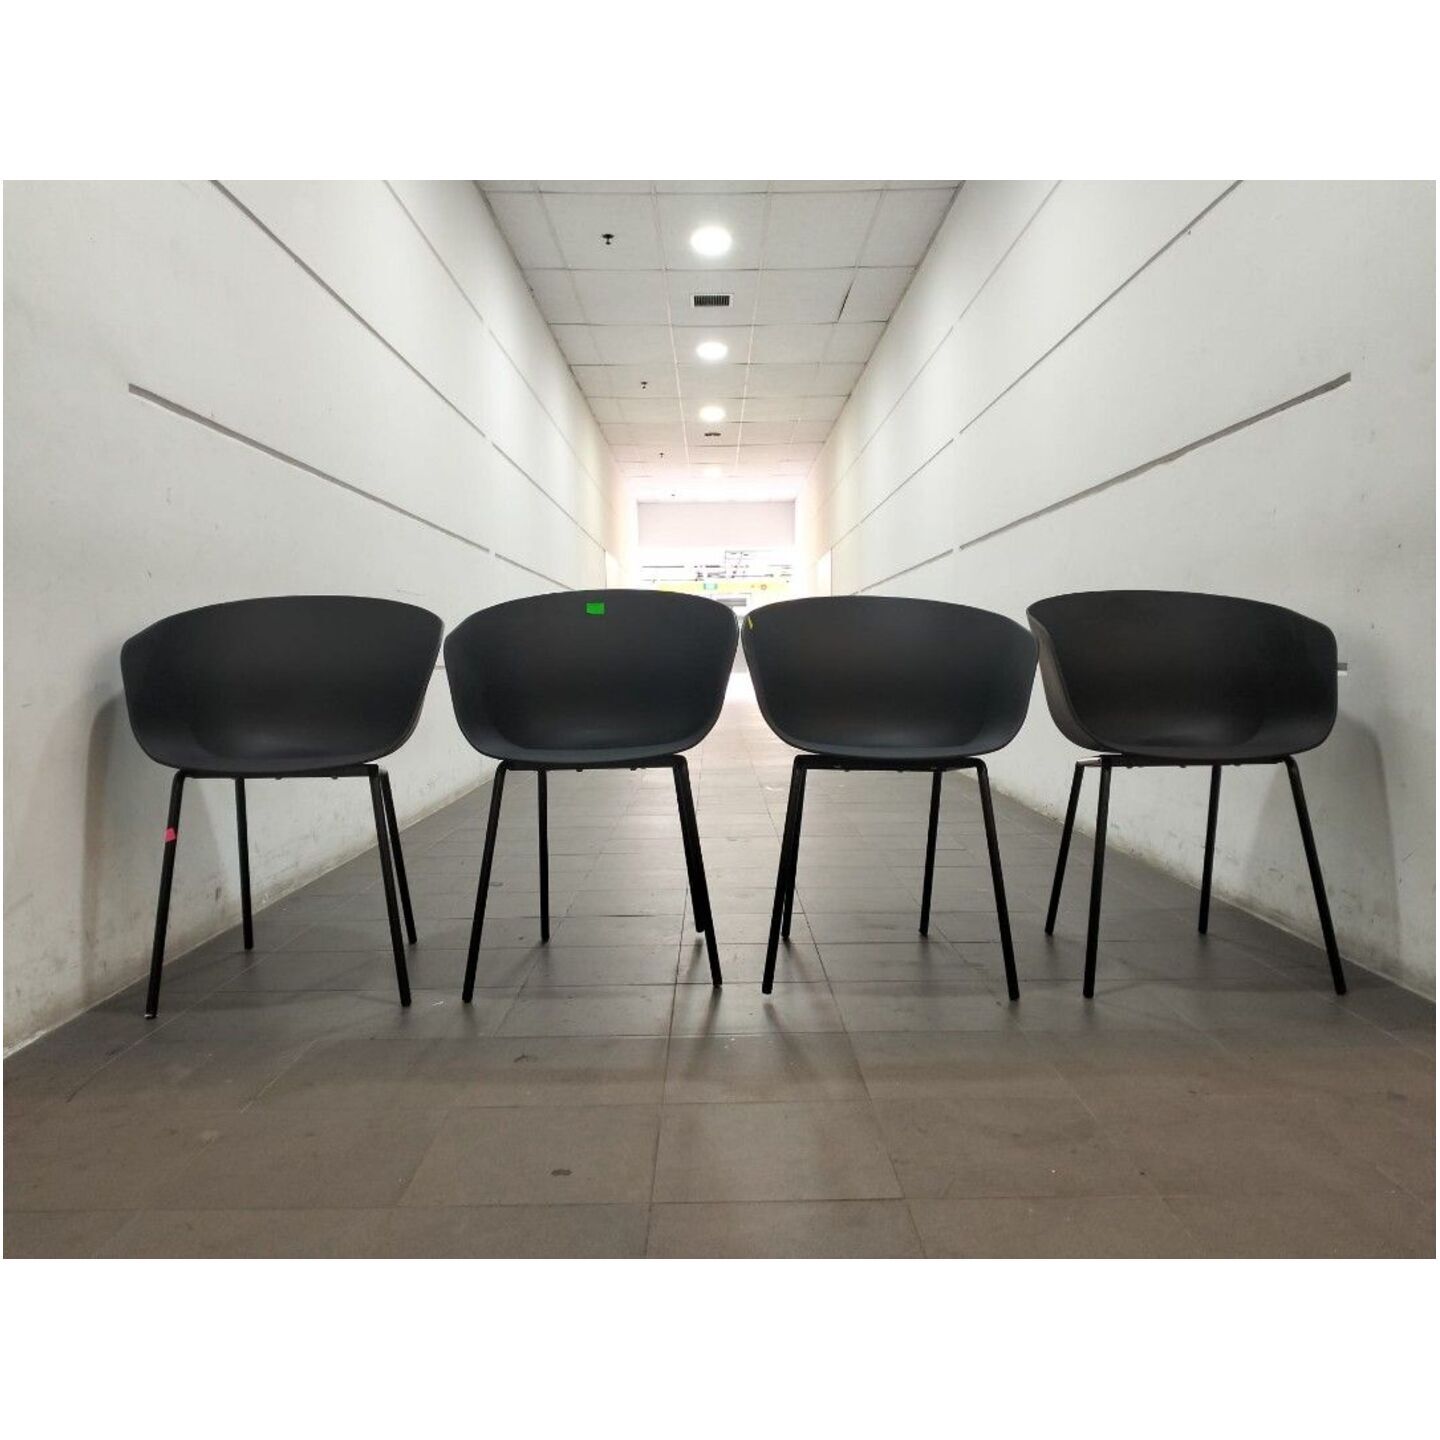 GYRO Armchairs in BLACK (set of 4)